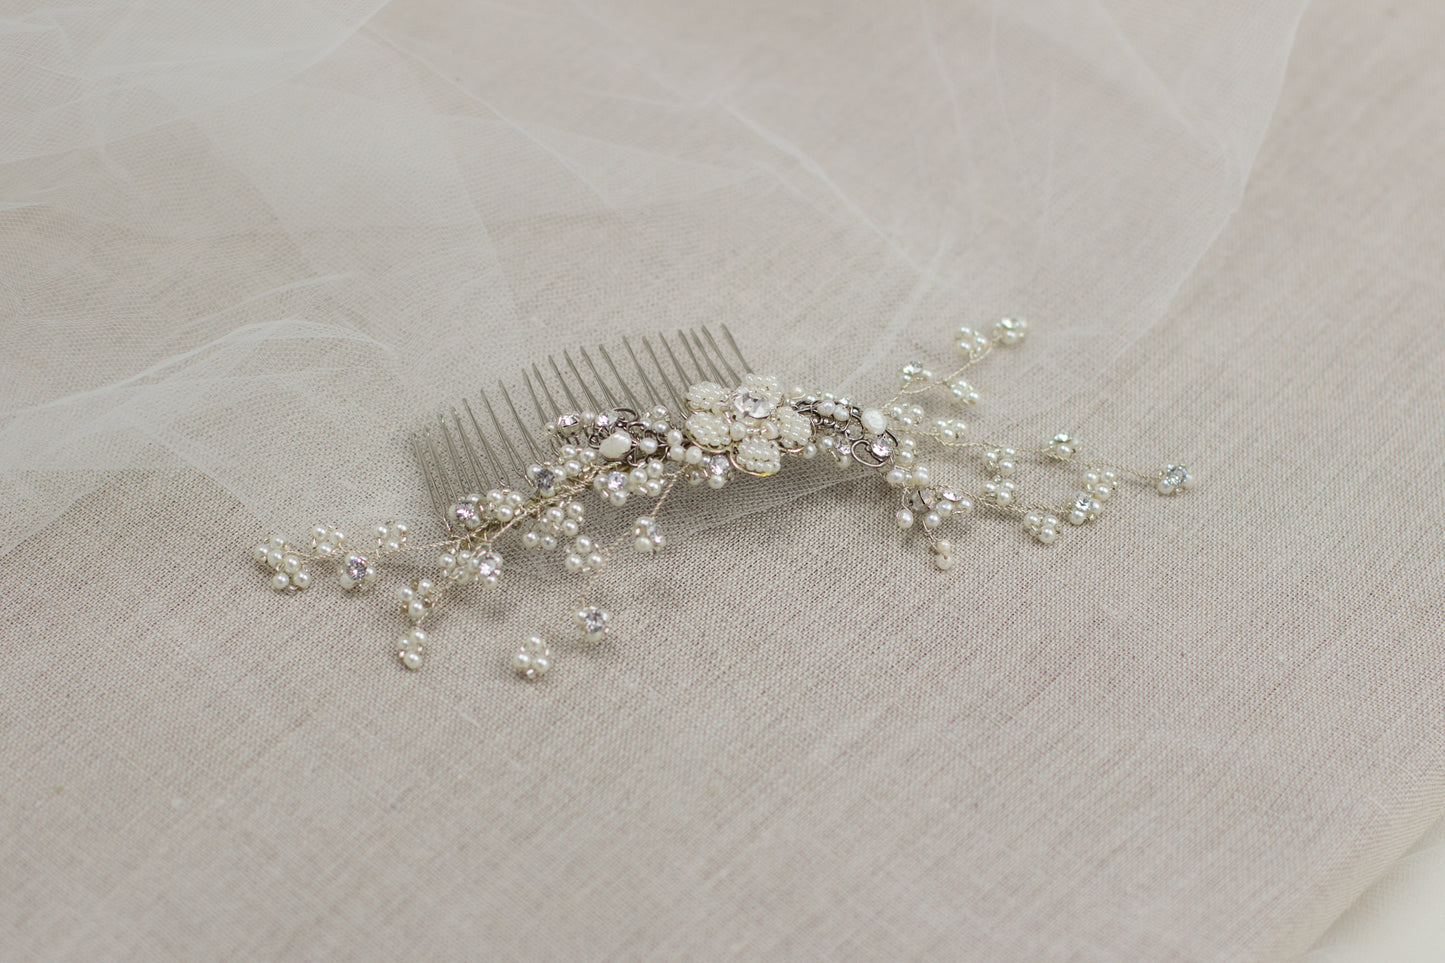 Explore unique handmade bridal hair accessories at our online boutique in Europe. This beautiful one of a kind pearl hair comb, bridal hair adornment, crystal wedding headpiece features floral motifs, pearl twigs decorated with crystals. Perfect for your special day.